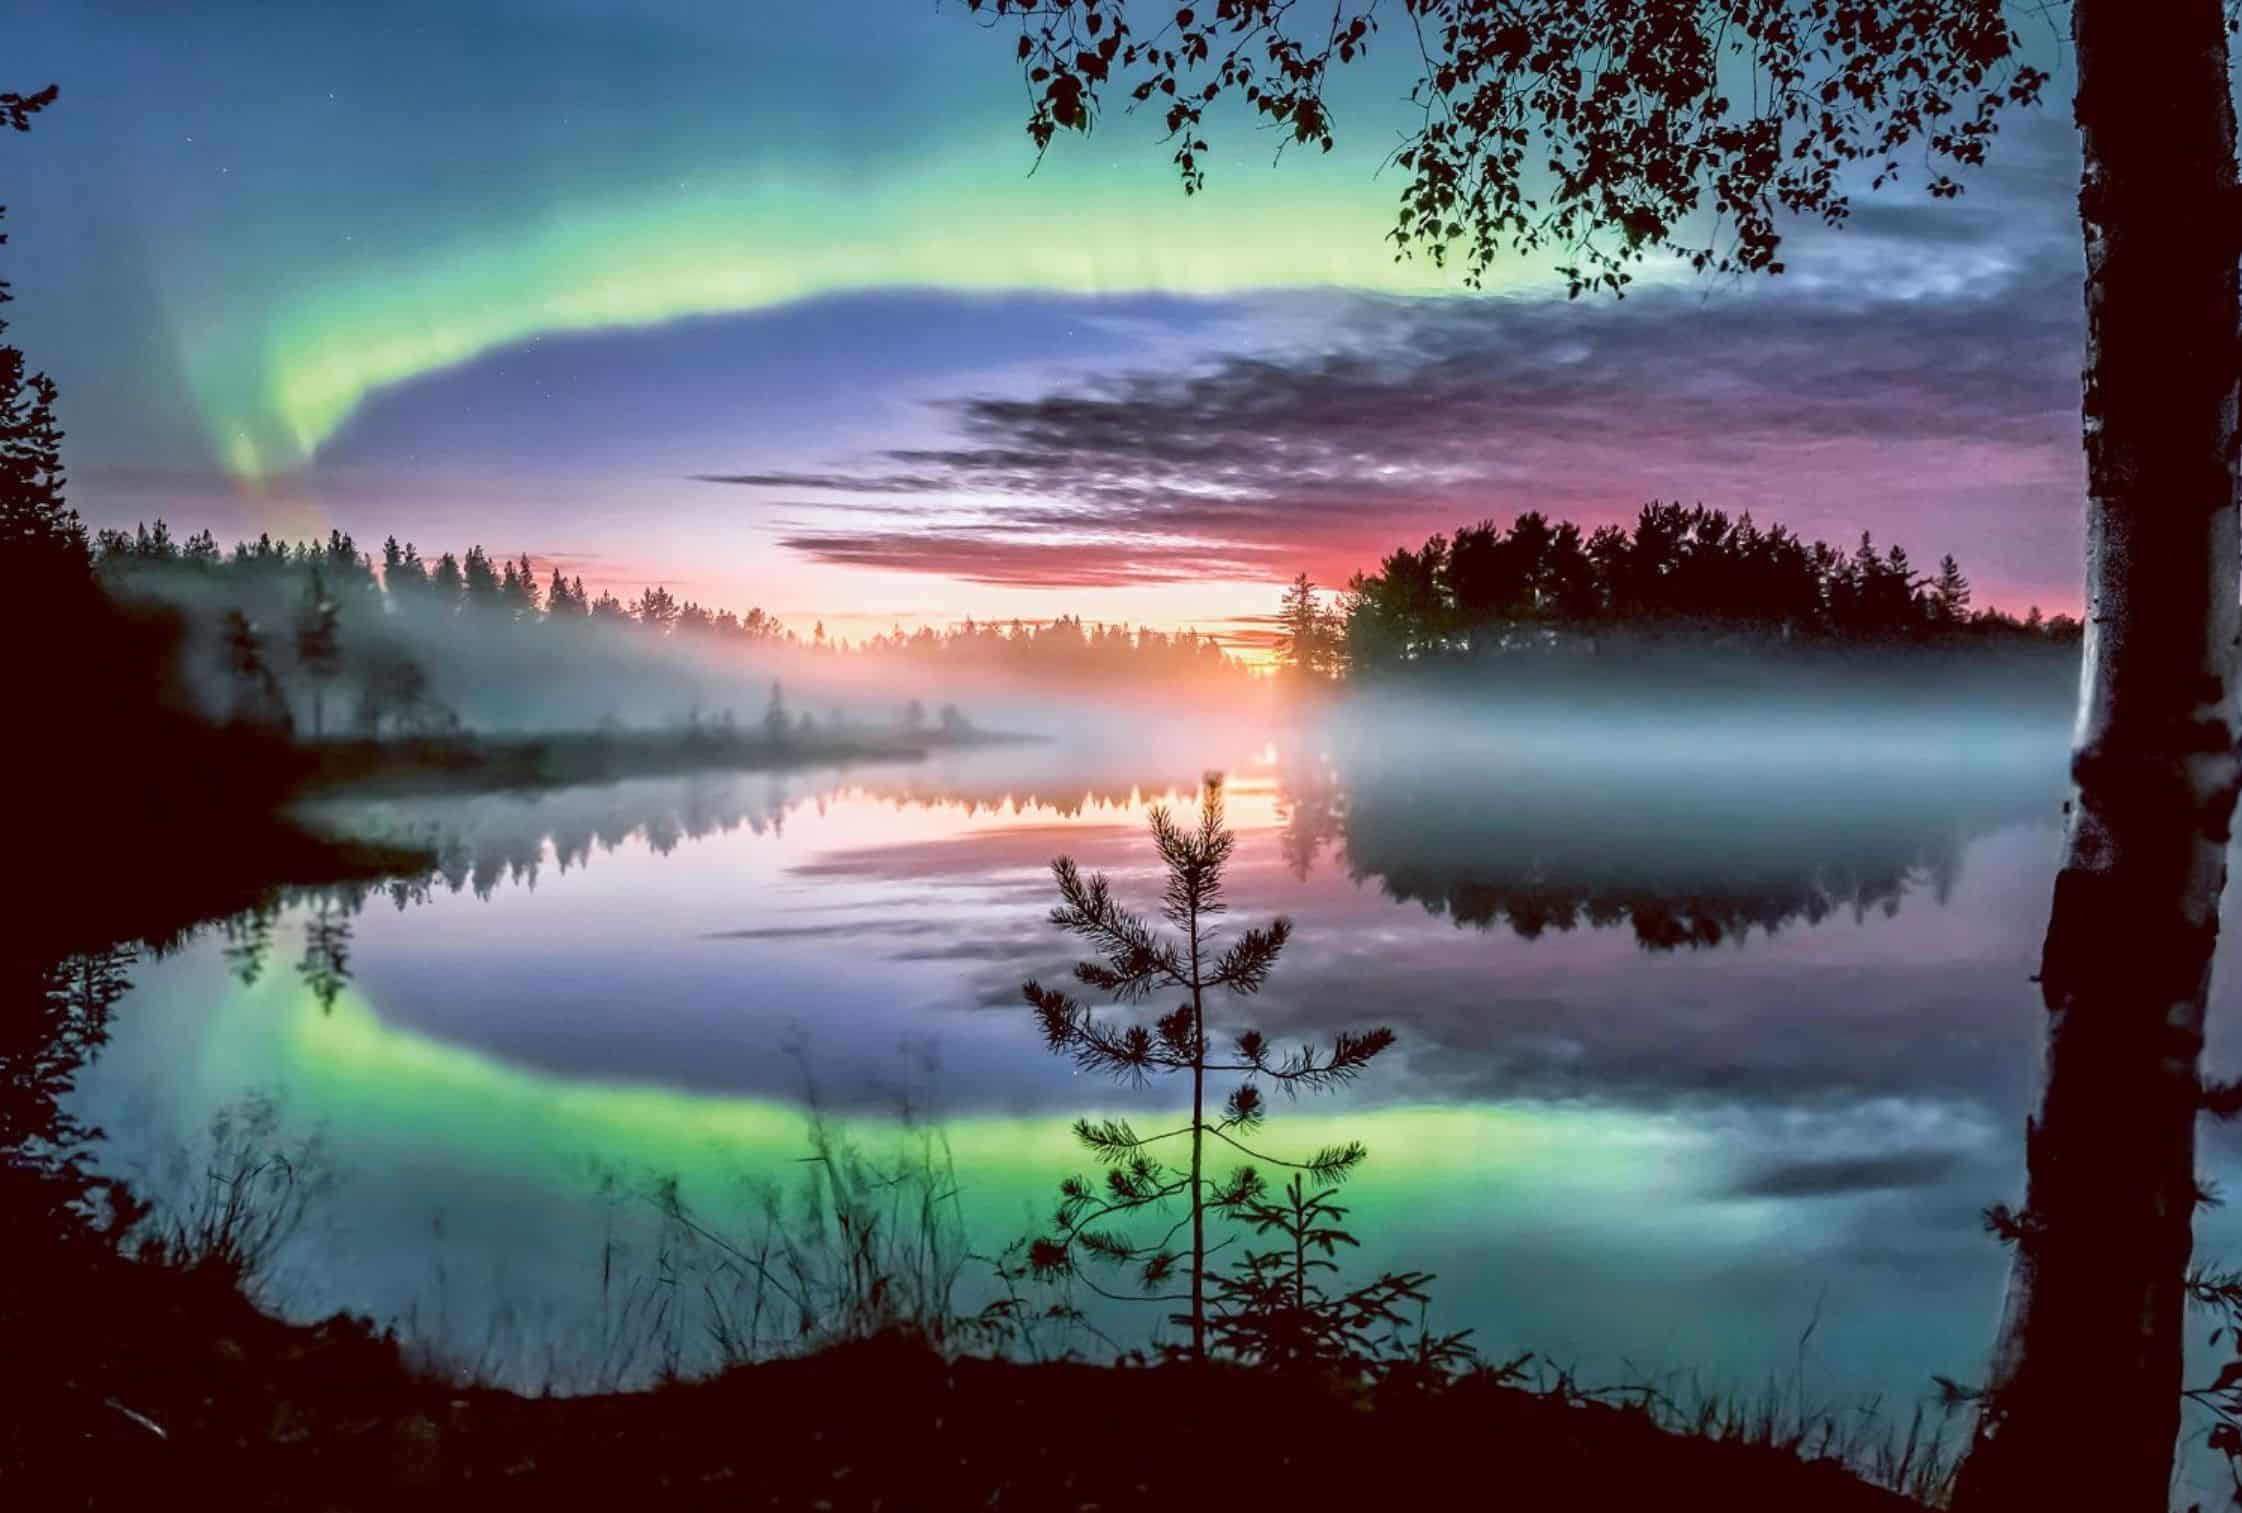 Ivalo, Finland is one of the best places to see the northern lights